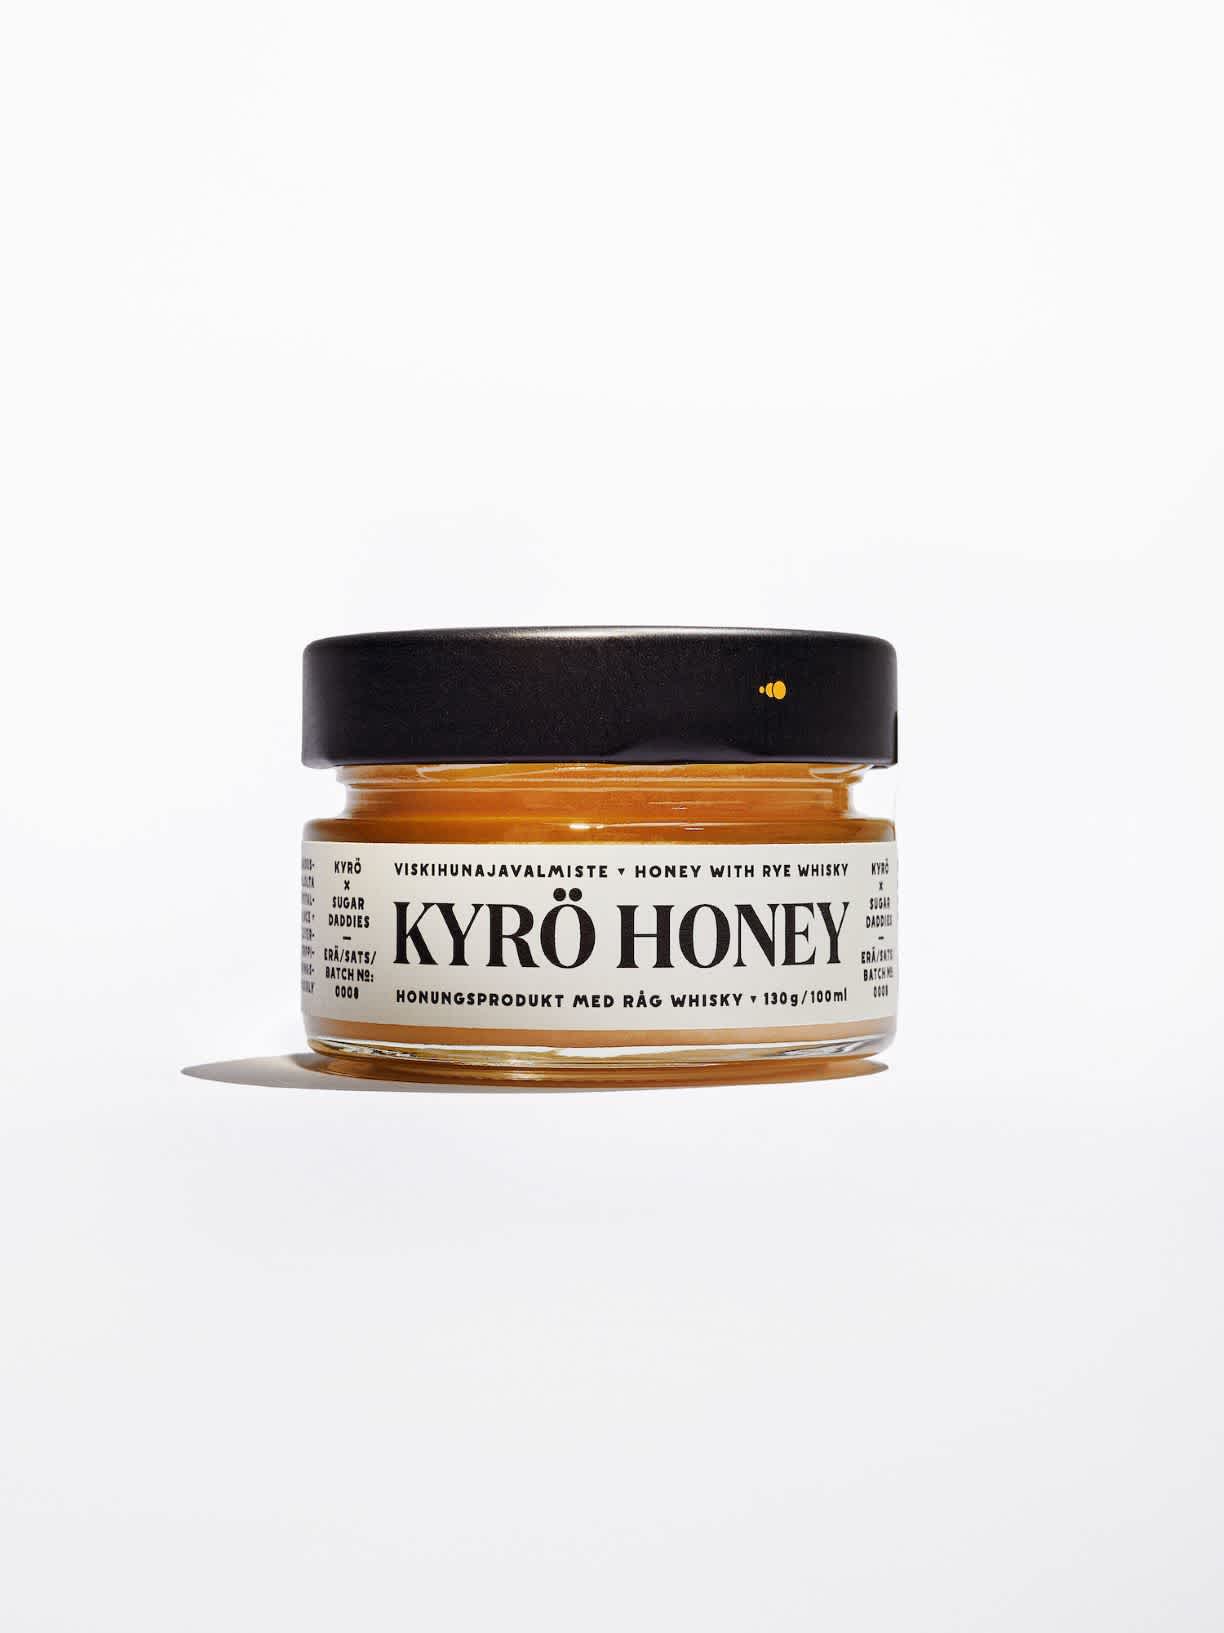 Product photo: a clear disc-like jar filled with honey. Produced by the Kyrö Distillery Company in Isokyrö, Finland. 